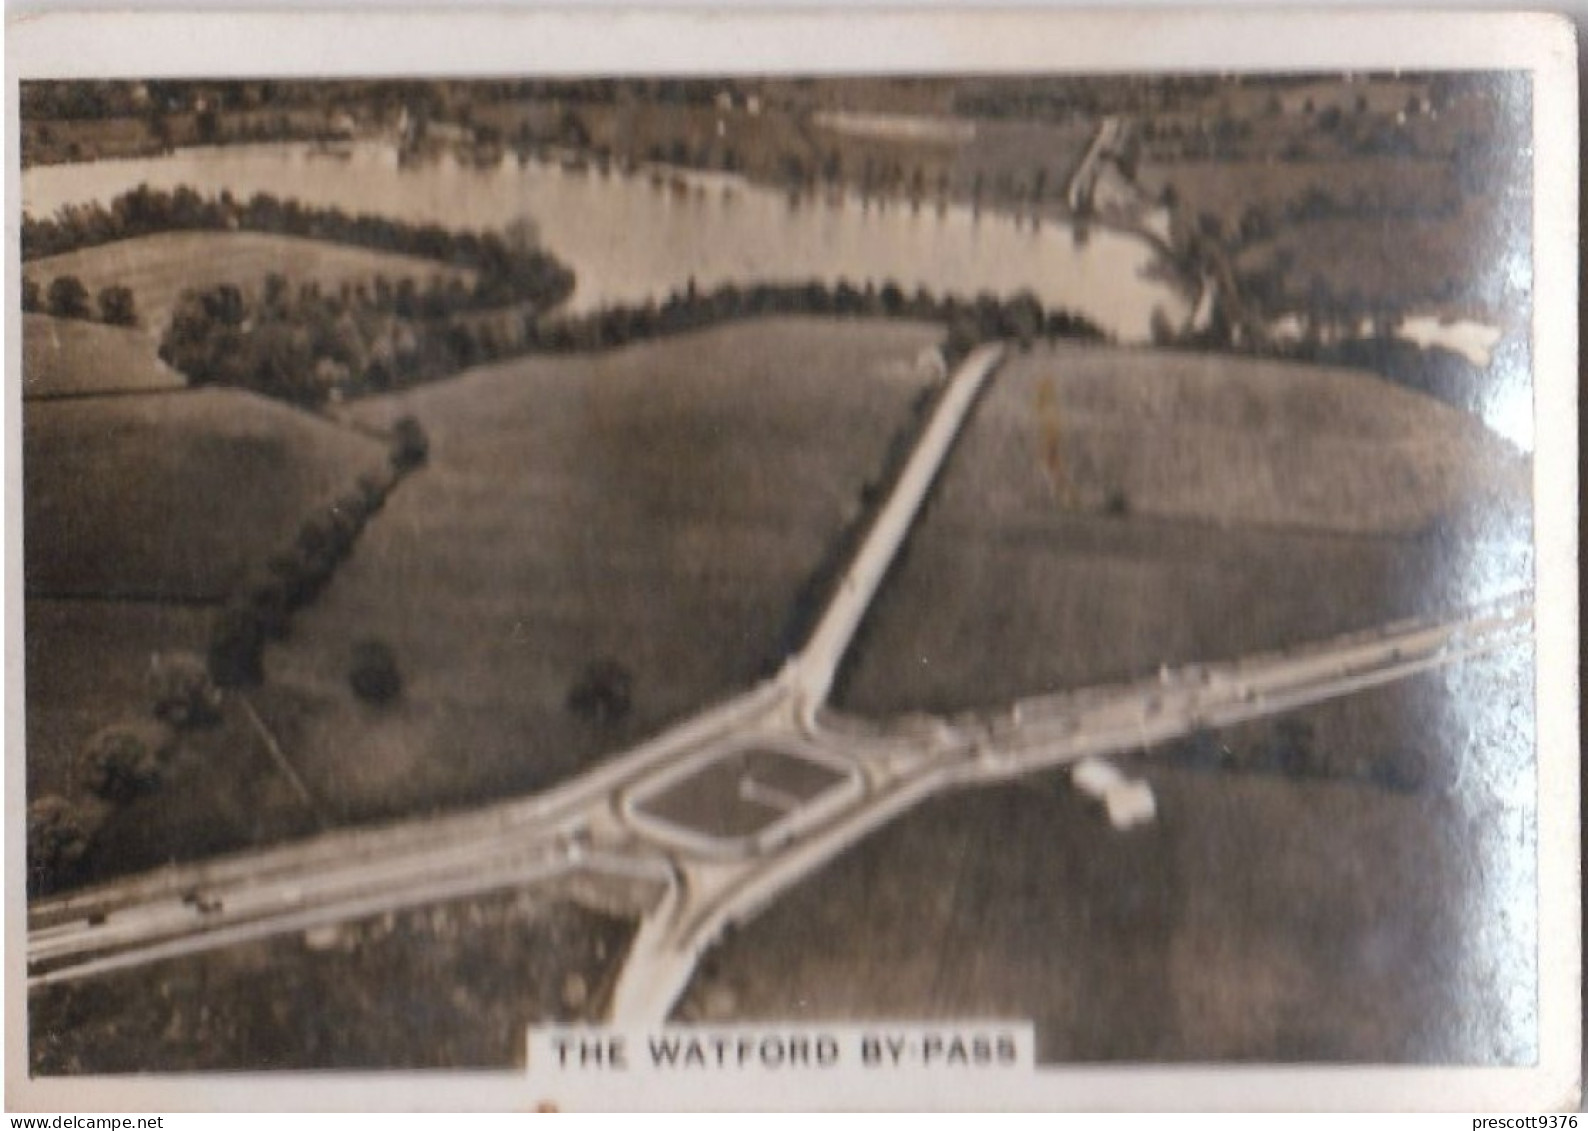 Britain From The Air 1938 - Senior Service - Real Photo - 5 Watford Bypass, Elstree Bushey Rd Jcn - Wills